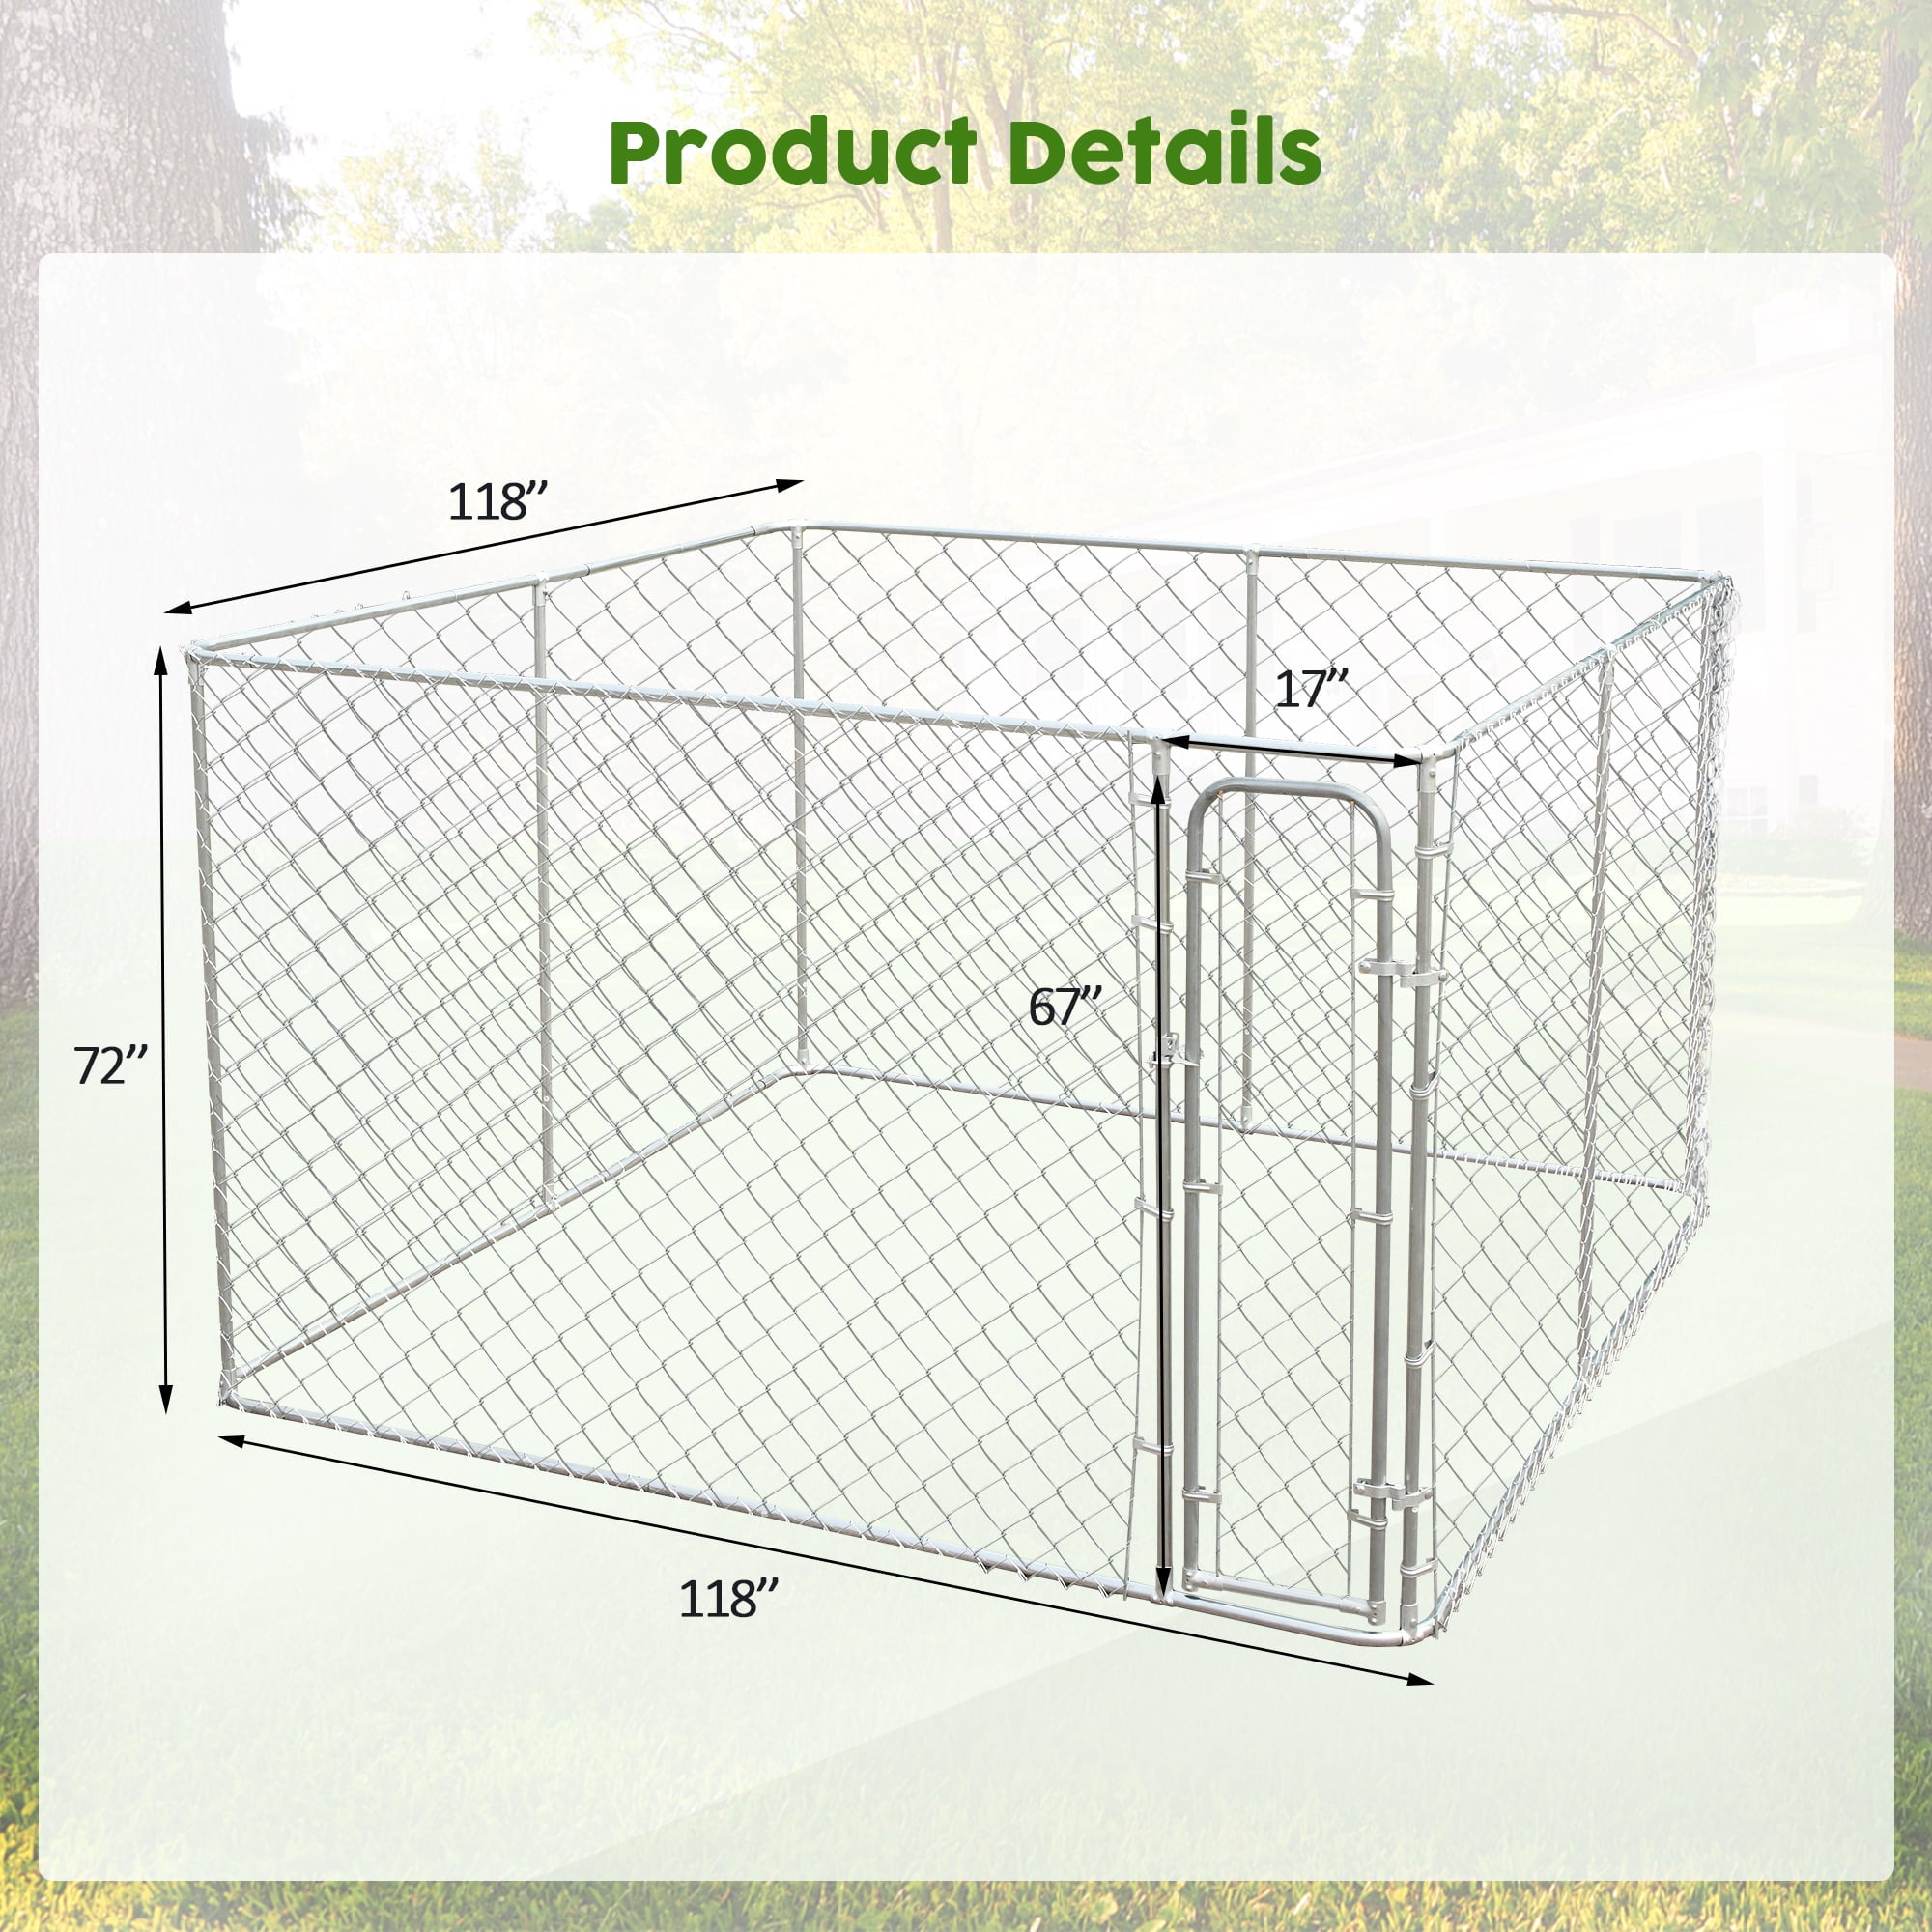 Coziwow 10 x 10 ft Outdoor Dog Kennel Dog Cage Enclosure Heavy Duty Chain Link for Large Dog W/ Door